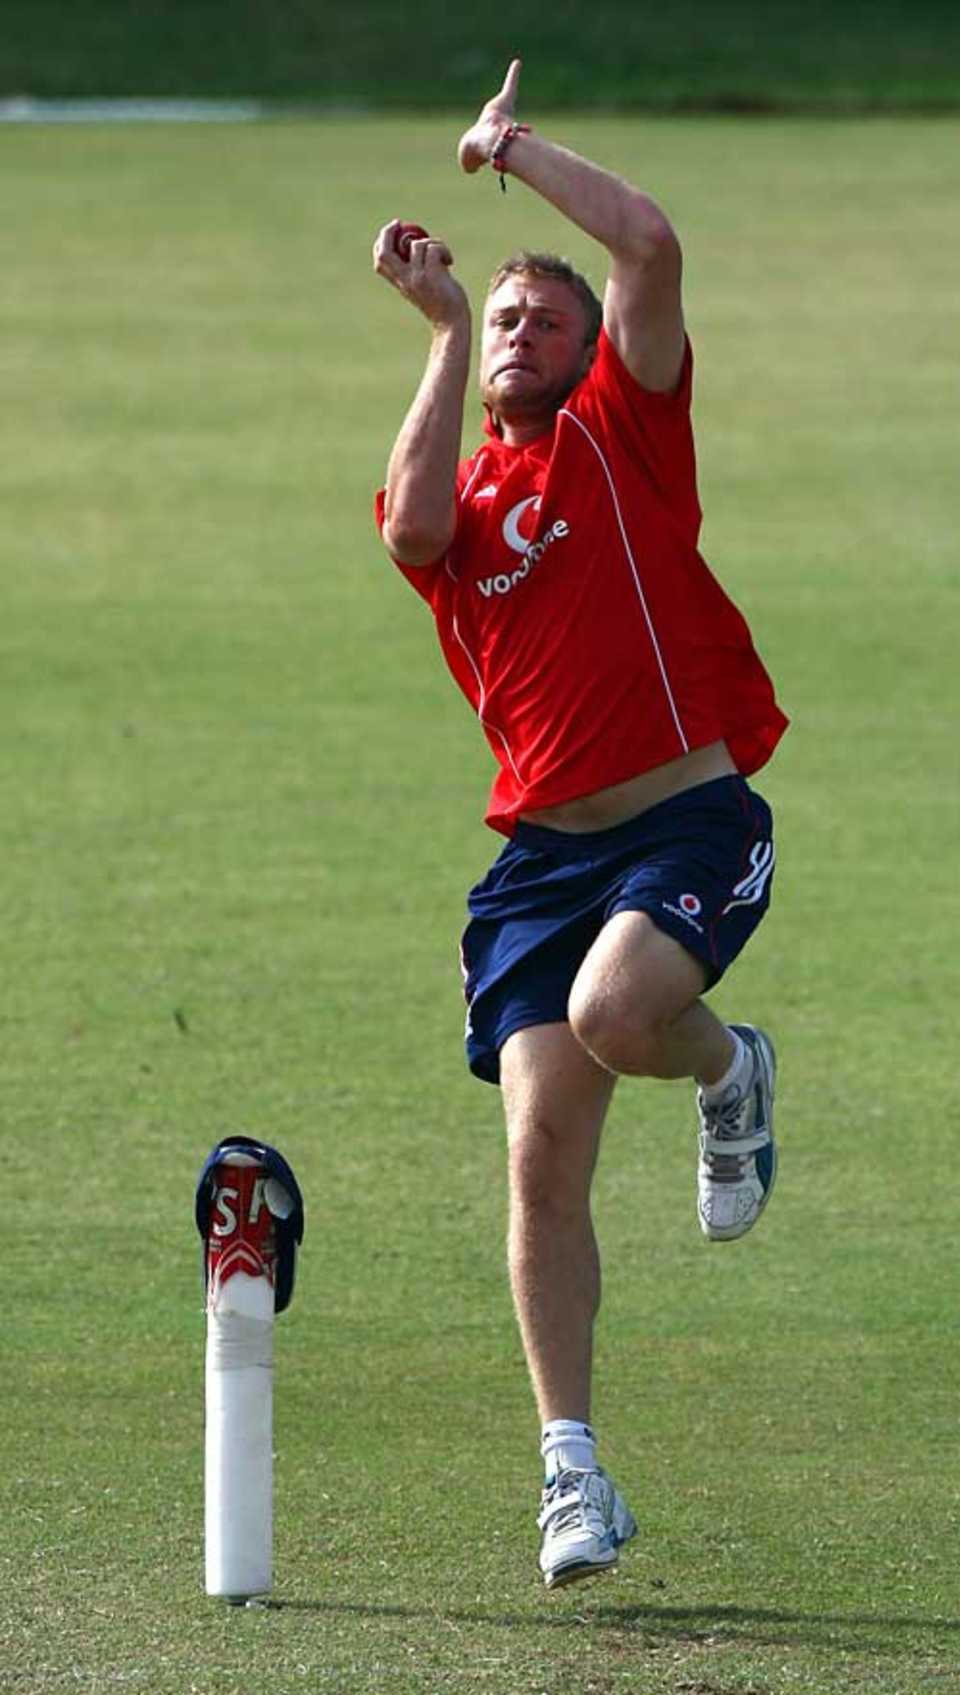 Andrew Flintoff bowled six overs at increasing pace during an early-morning practice, West Indies A v England XI, Warner Park, January 31, 2009